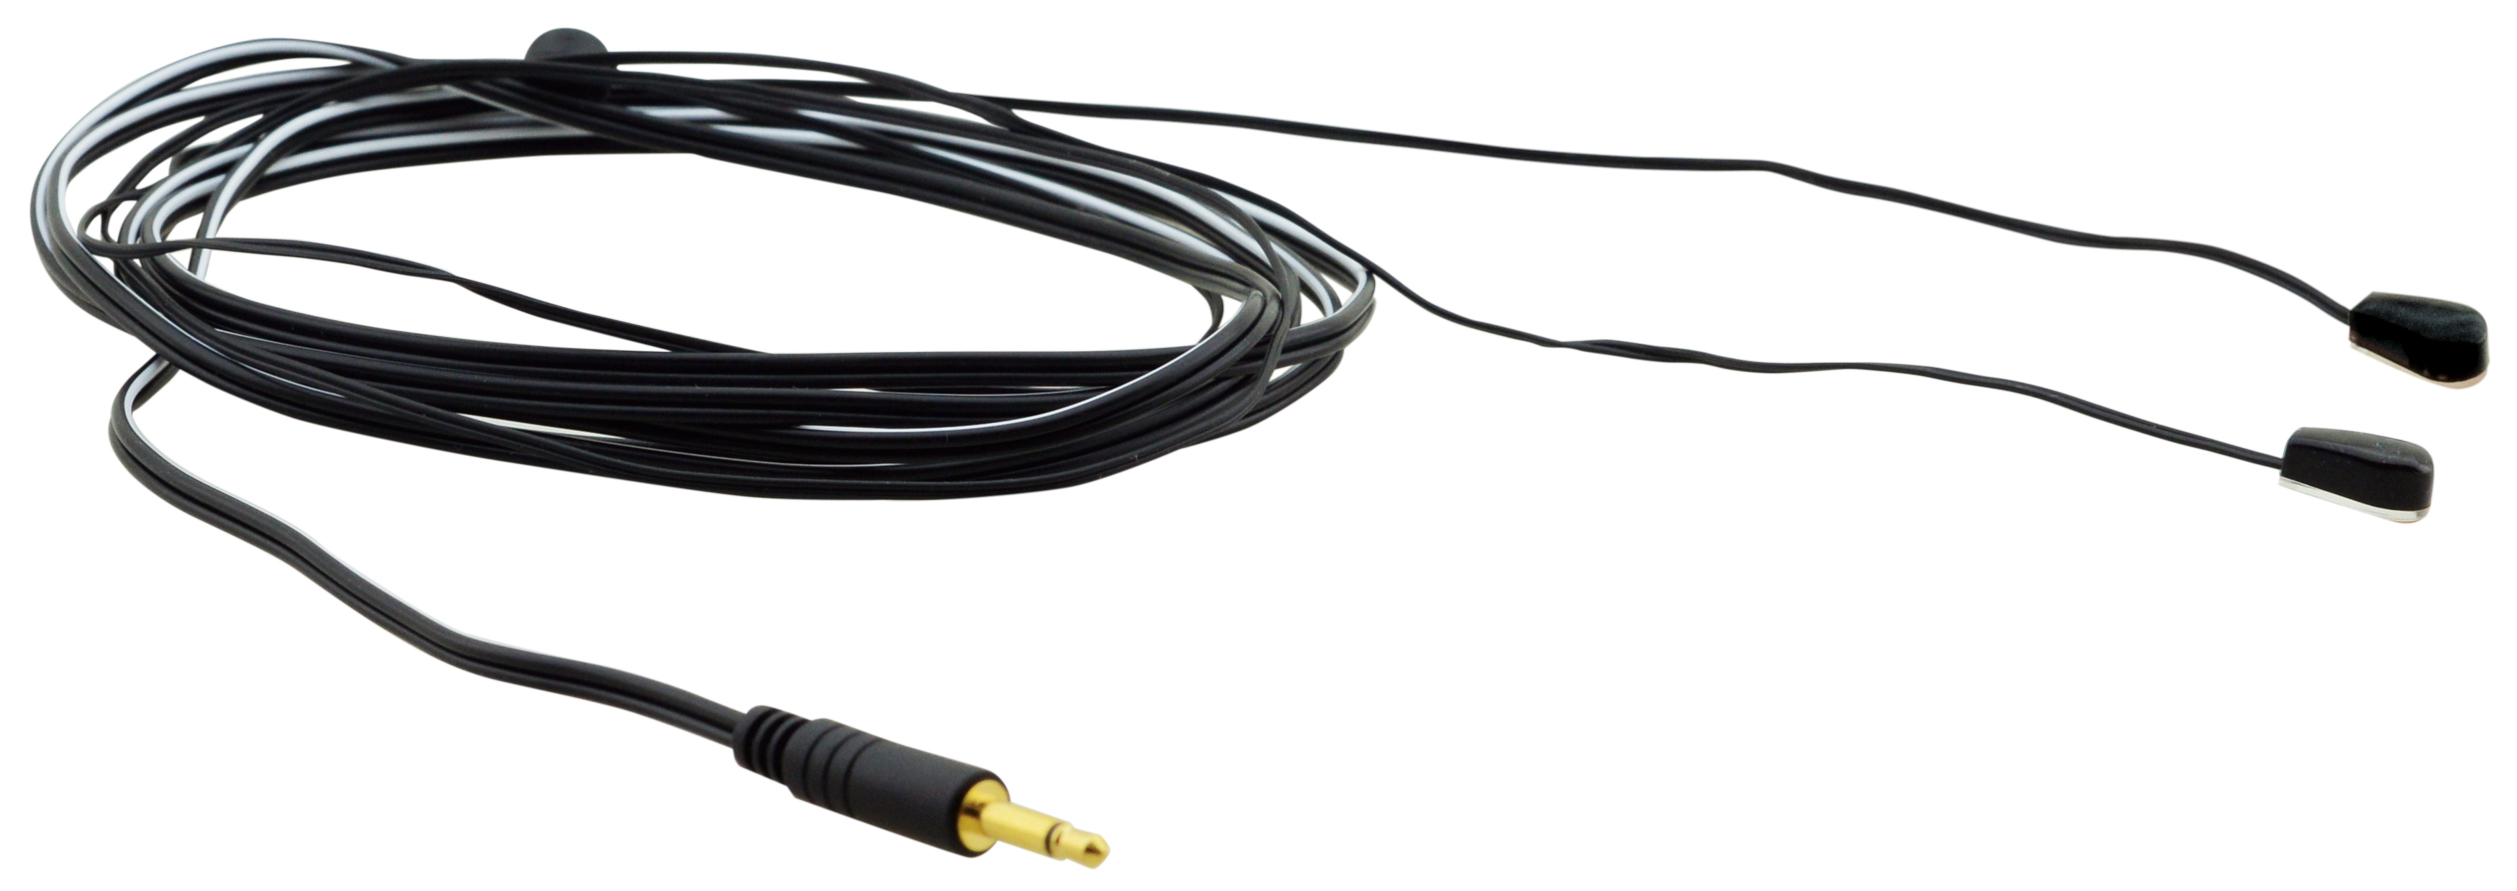 Kramer C-A35M/2IRE-10 3.5mm (M) to 2 IR Emitter Cable - 3m